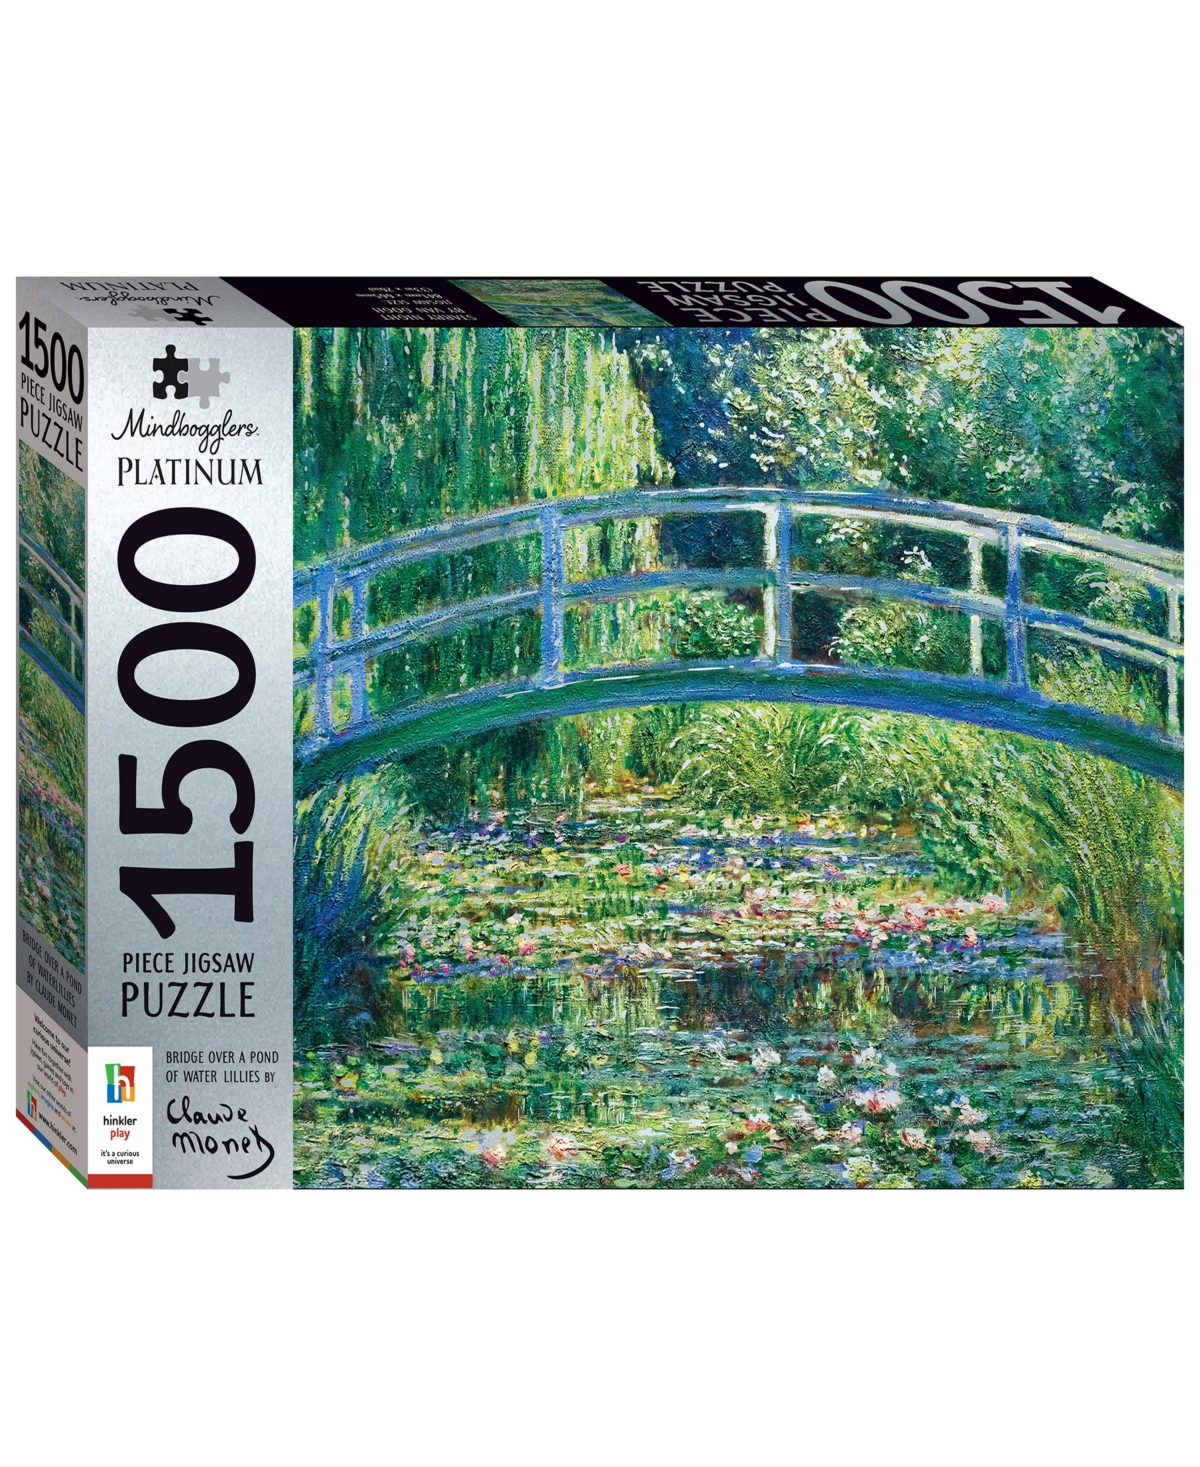 Mindbogglers Kids' Platinum 1500-piece, Bridge Over A Pond Of Water Lilies By Monet Jigsaws For Adults Deluxe, 33 X 26 In Multi